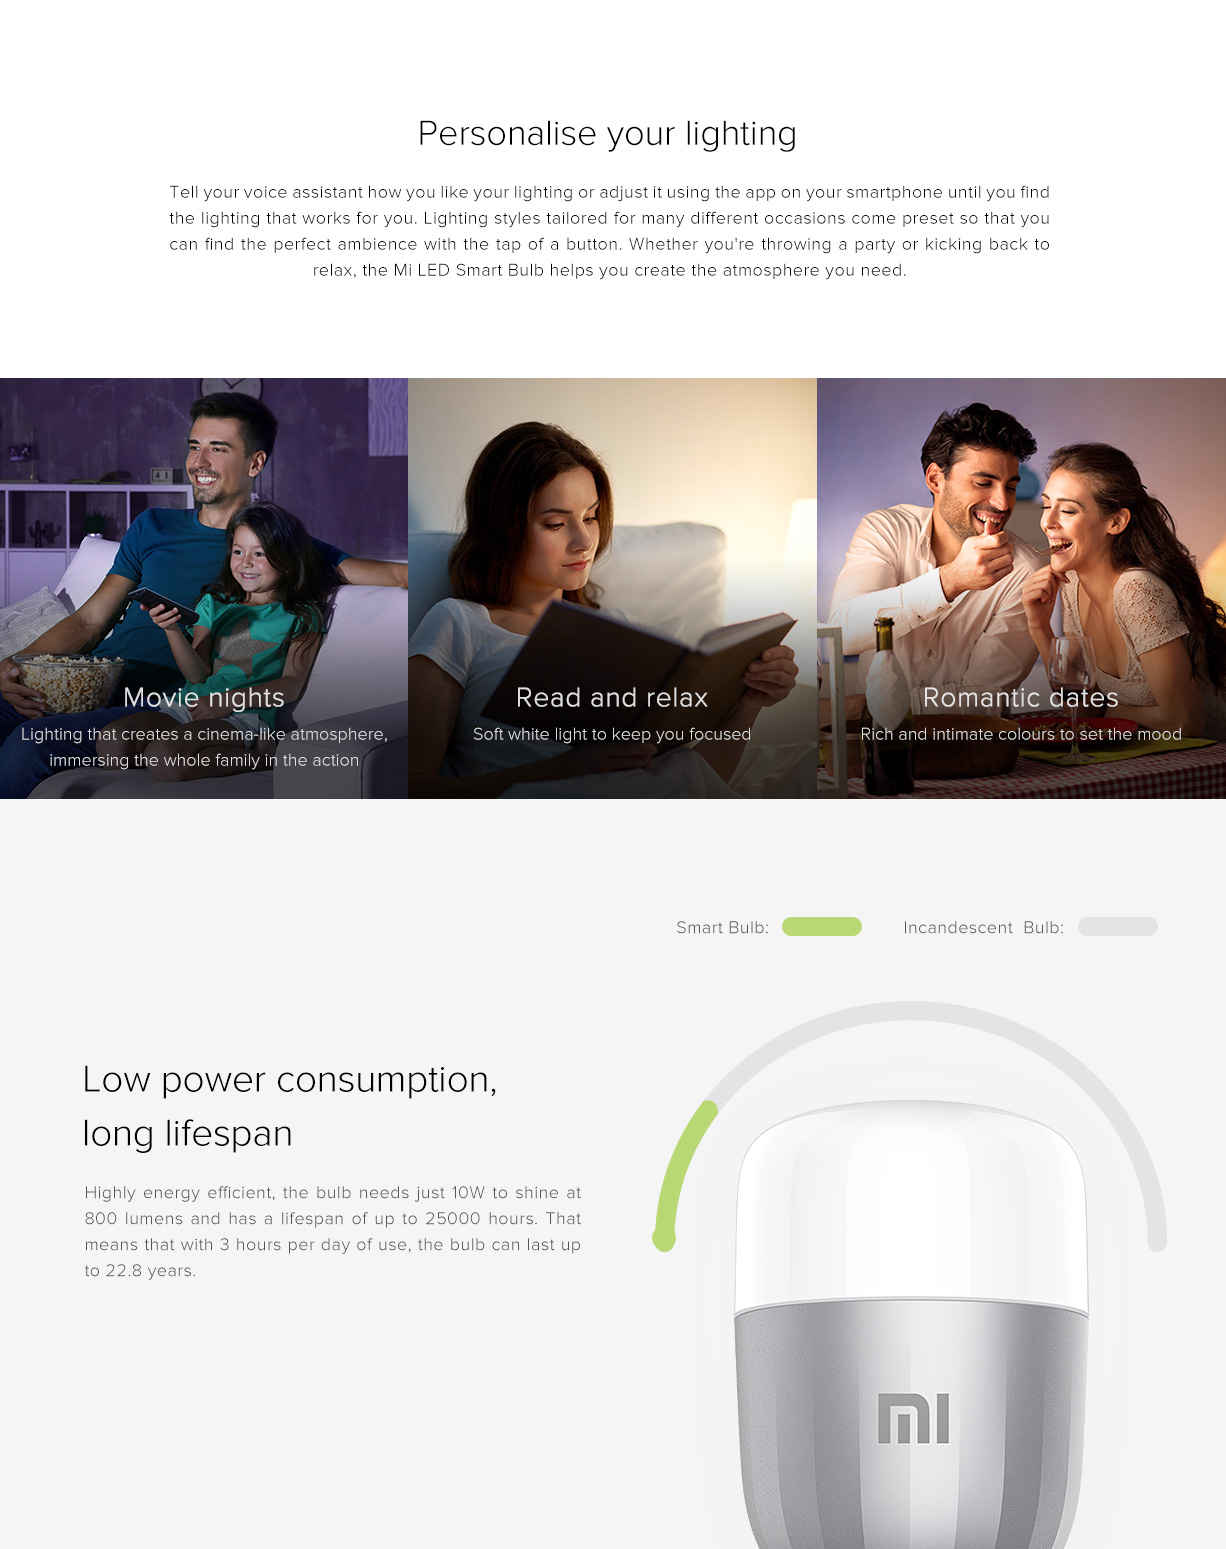 36218700 50A5 1119 55B1 5722Ebff2738 Xiaomi Xiaomi Mi Smart Led Bulb Essential(White And Color) Wifi Remote Control Smart Light Work With Alexa And Google Assistant, Voice Control, Wifi Connection, Adjustable Color Temperature, Scheduled On/Off, Smart App Control Smart Bulb Xiaomi Mi Led Smart Bulb Essential Bulb (White And Color)(9W)